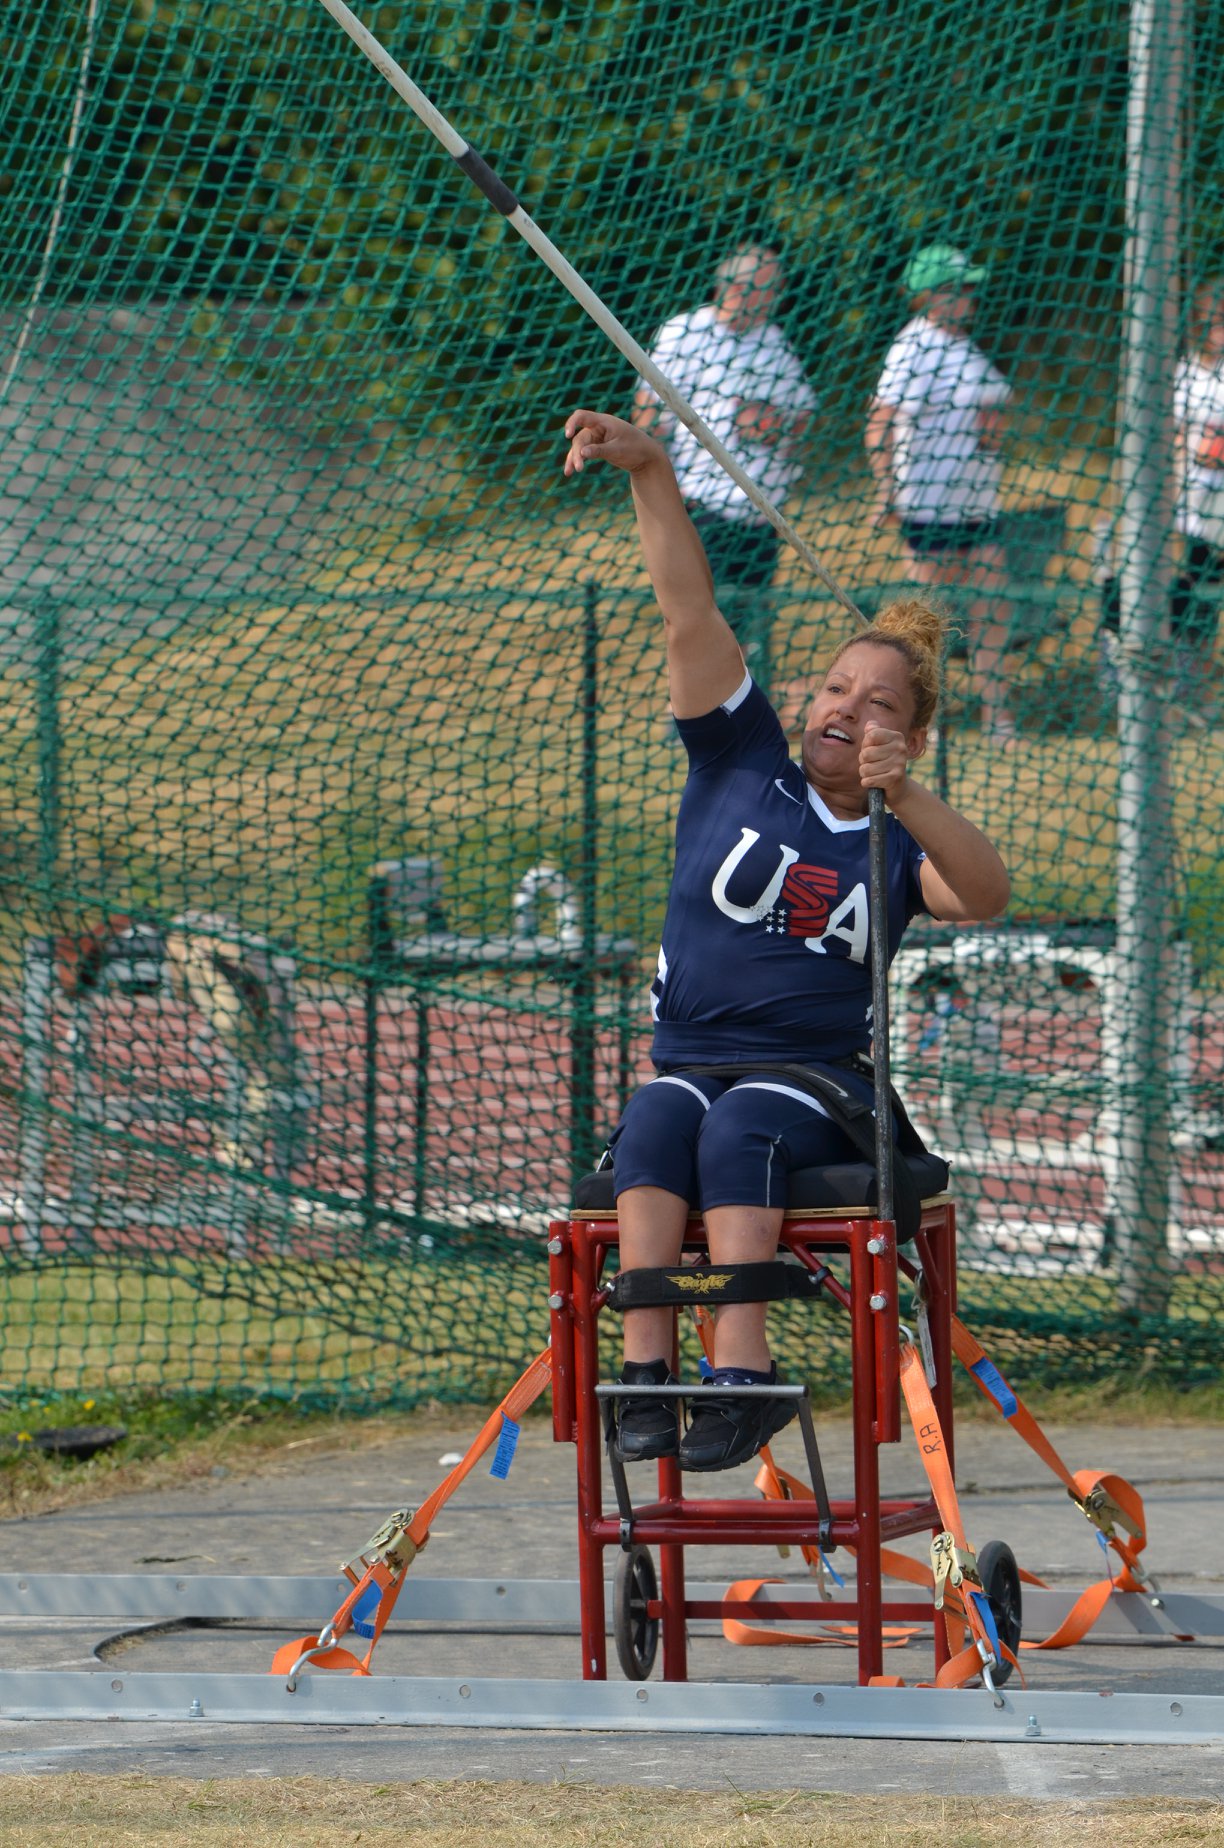 Person participating in sitting javelin throwing